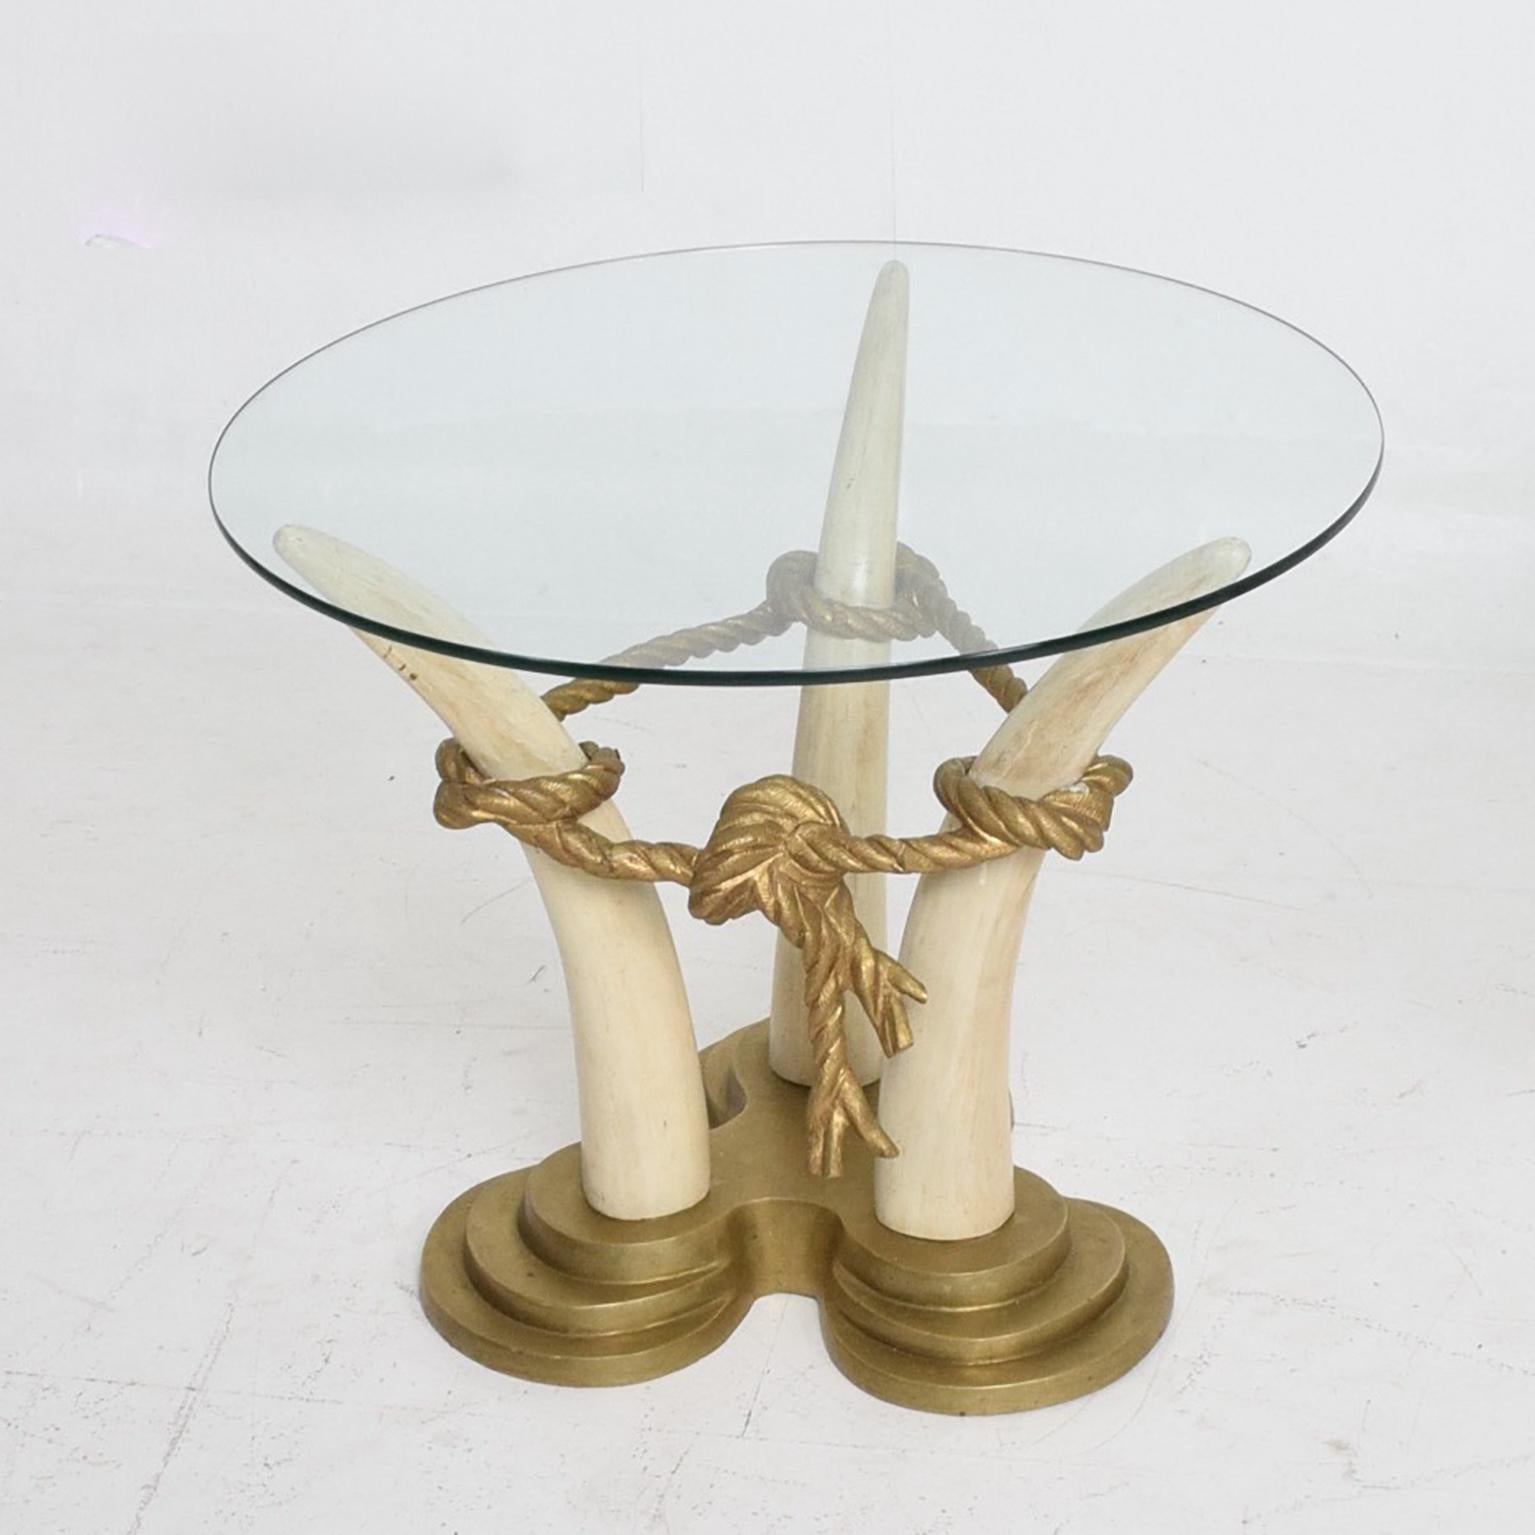 Side Tables
1970s by designer Italo Valenti of Spain VALENTI & CO 
Exotic side tables faux ivory bases made from painted hardwood.
Each faux tusk is connected by bronze rope and topped by a round glass panel that allows full view of the elaborate